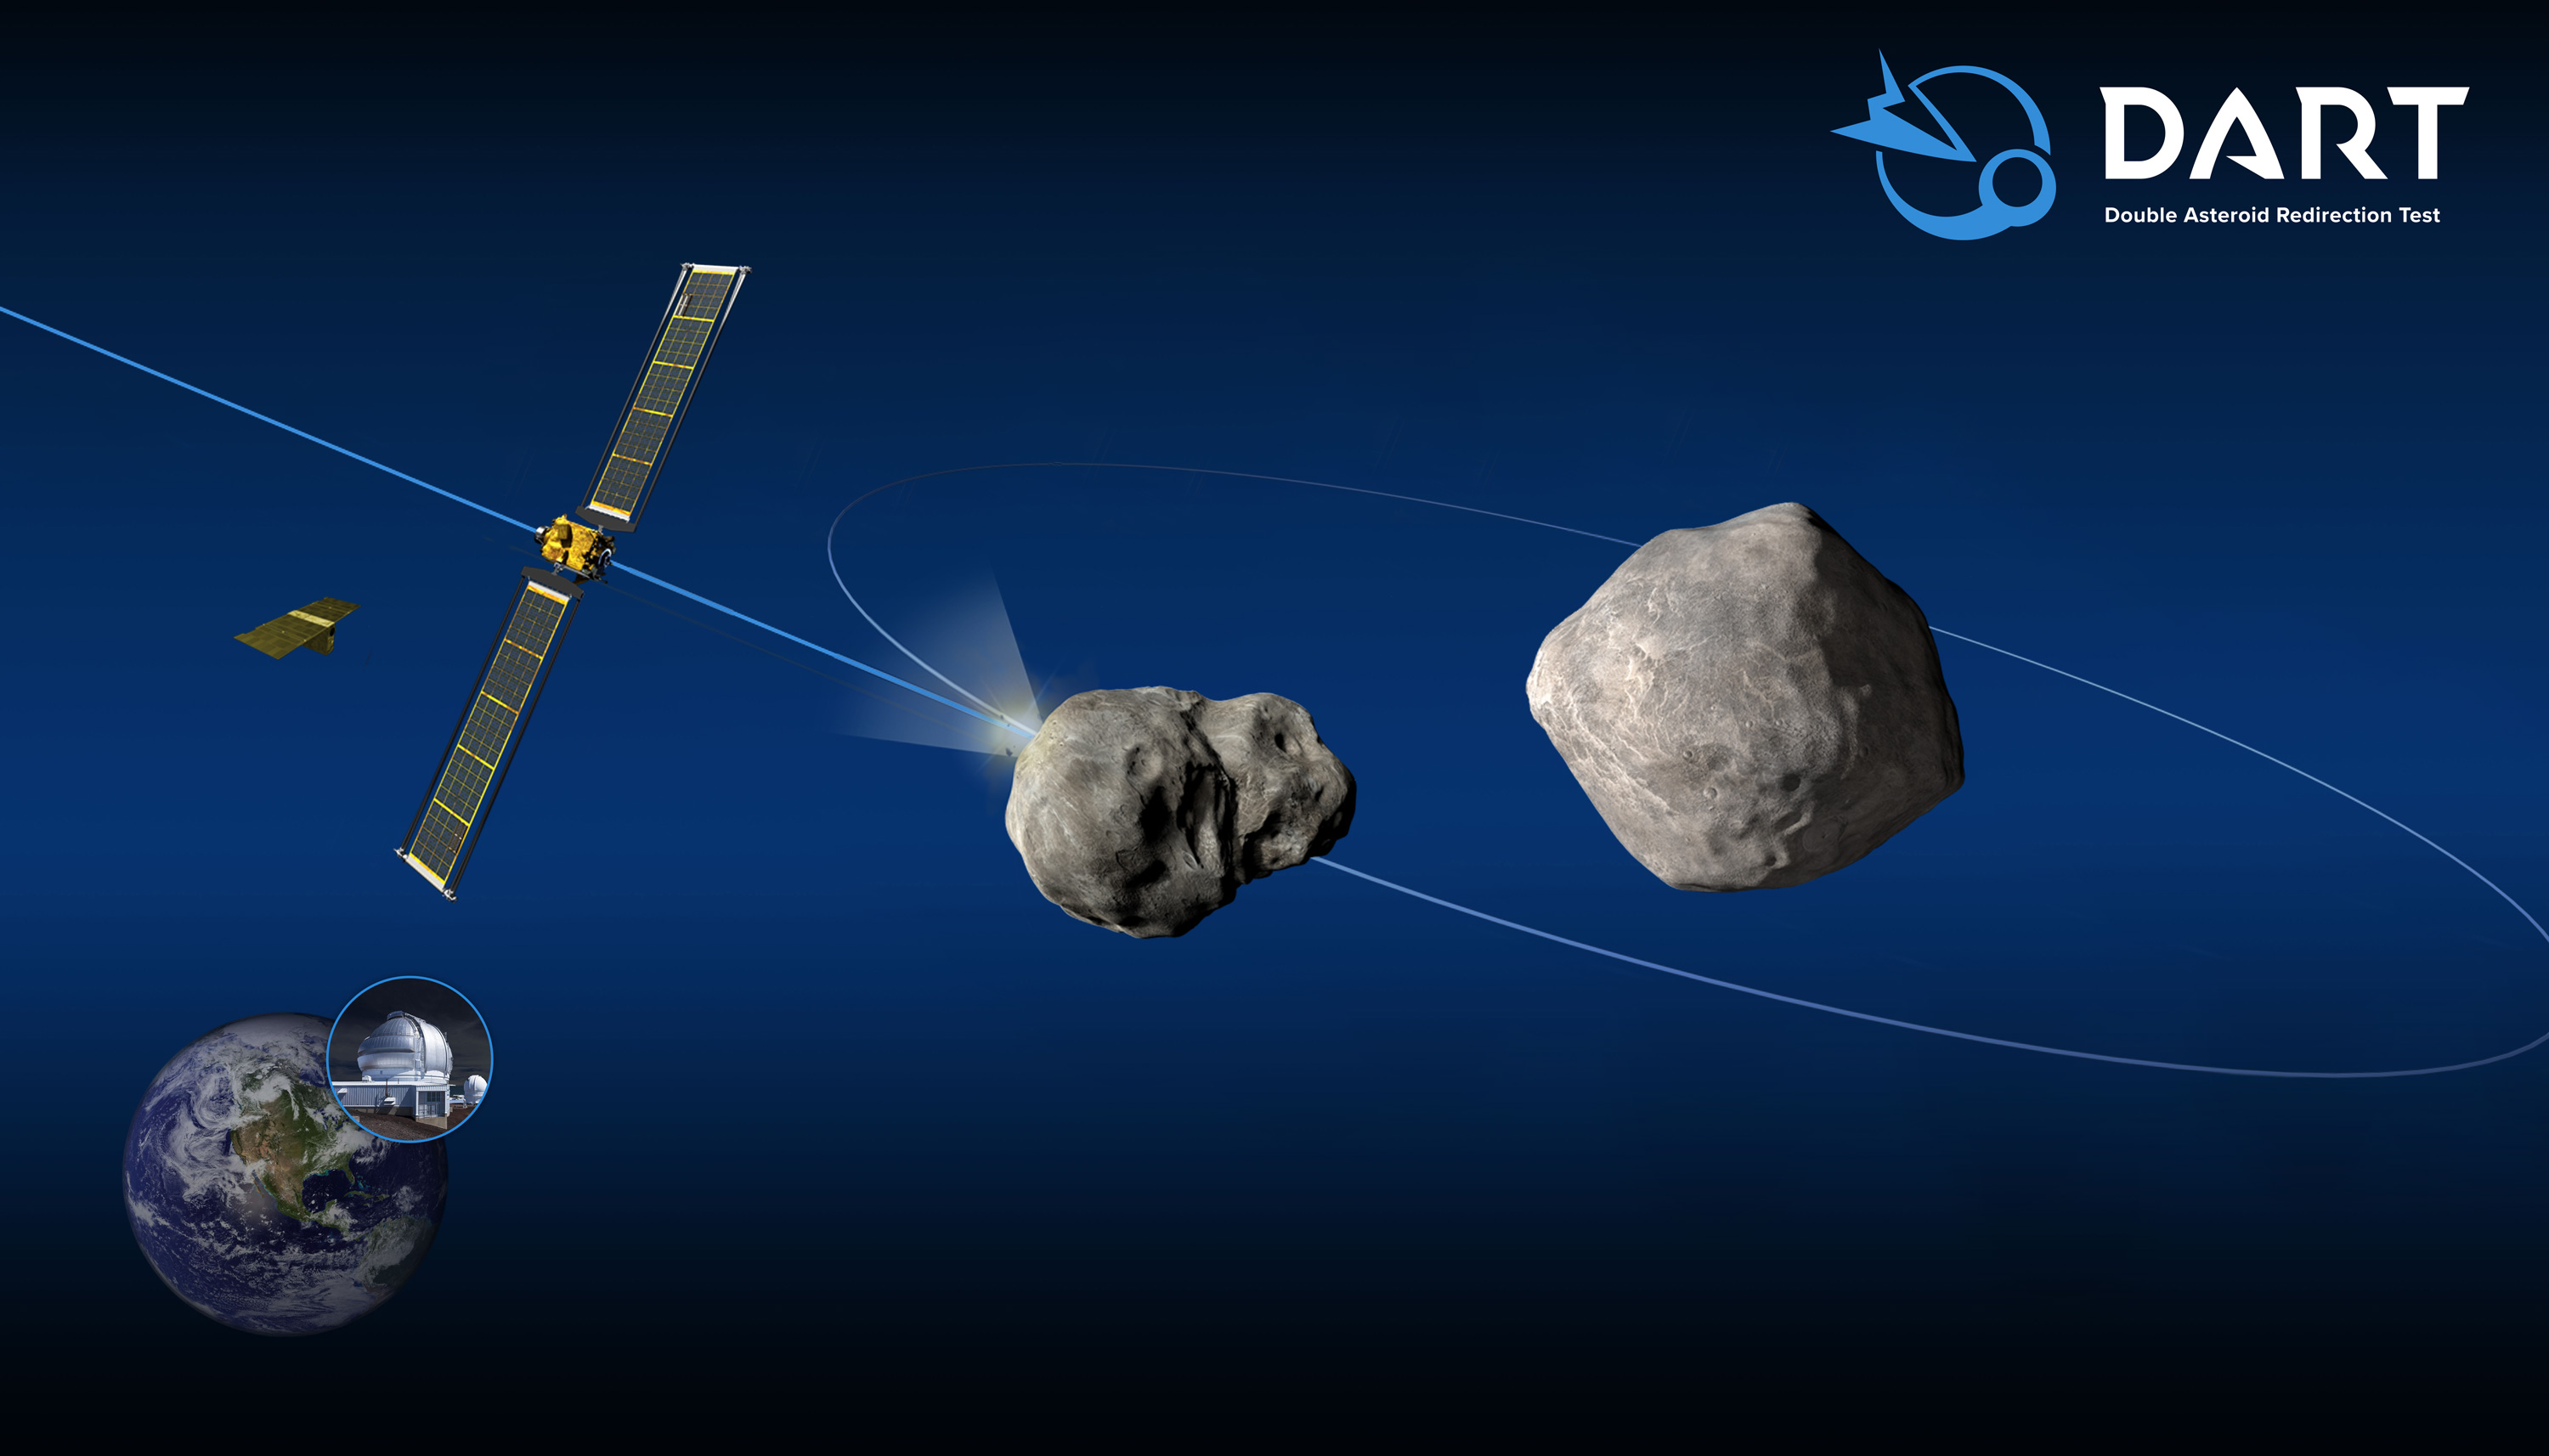 A CG render of the DART spacecraft ramming into the moonlet of Didymos.